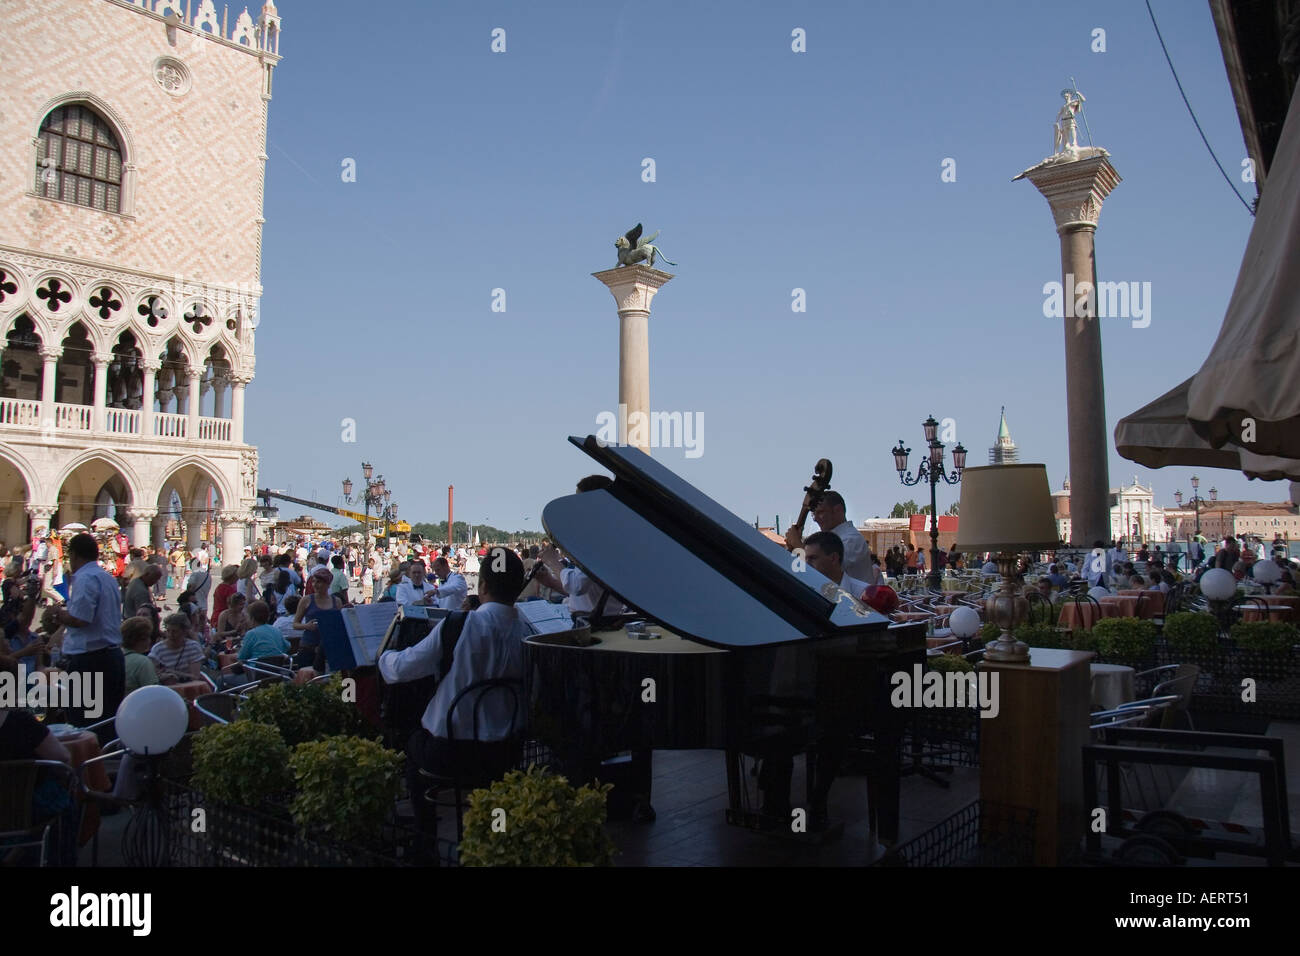 Musicians at the Gran Cafe Chioggia across from the Doges Palace beneath the Columns of San Marco and San Teodoro Venice Italy Stock Photo